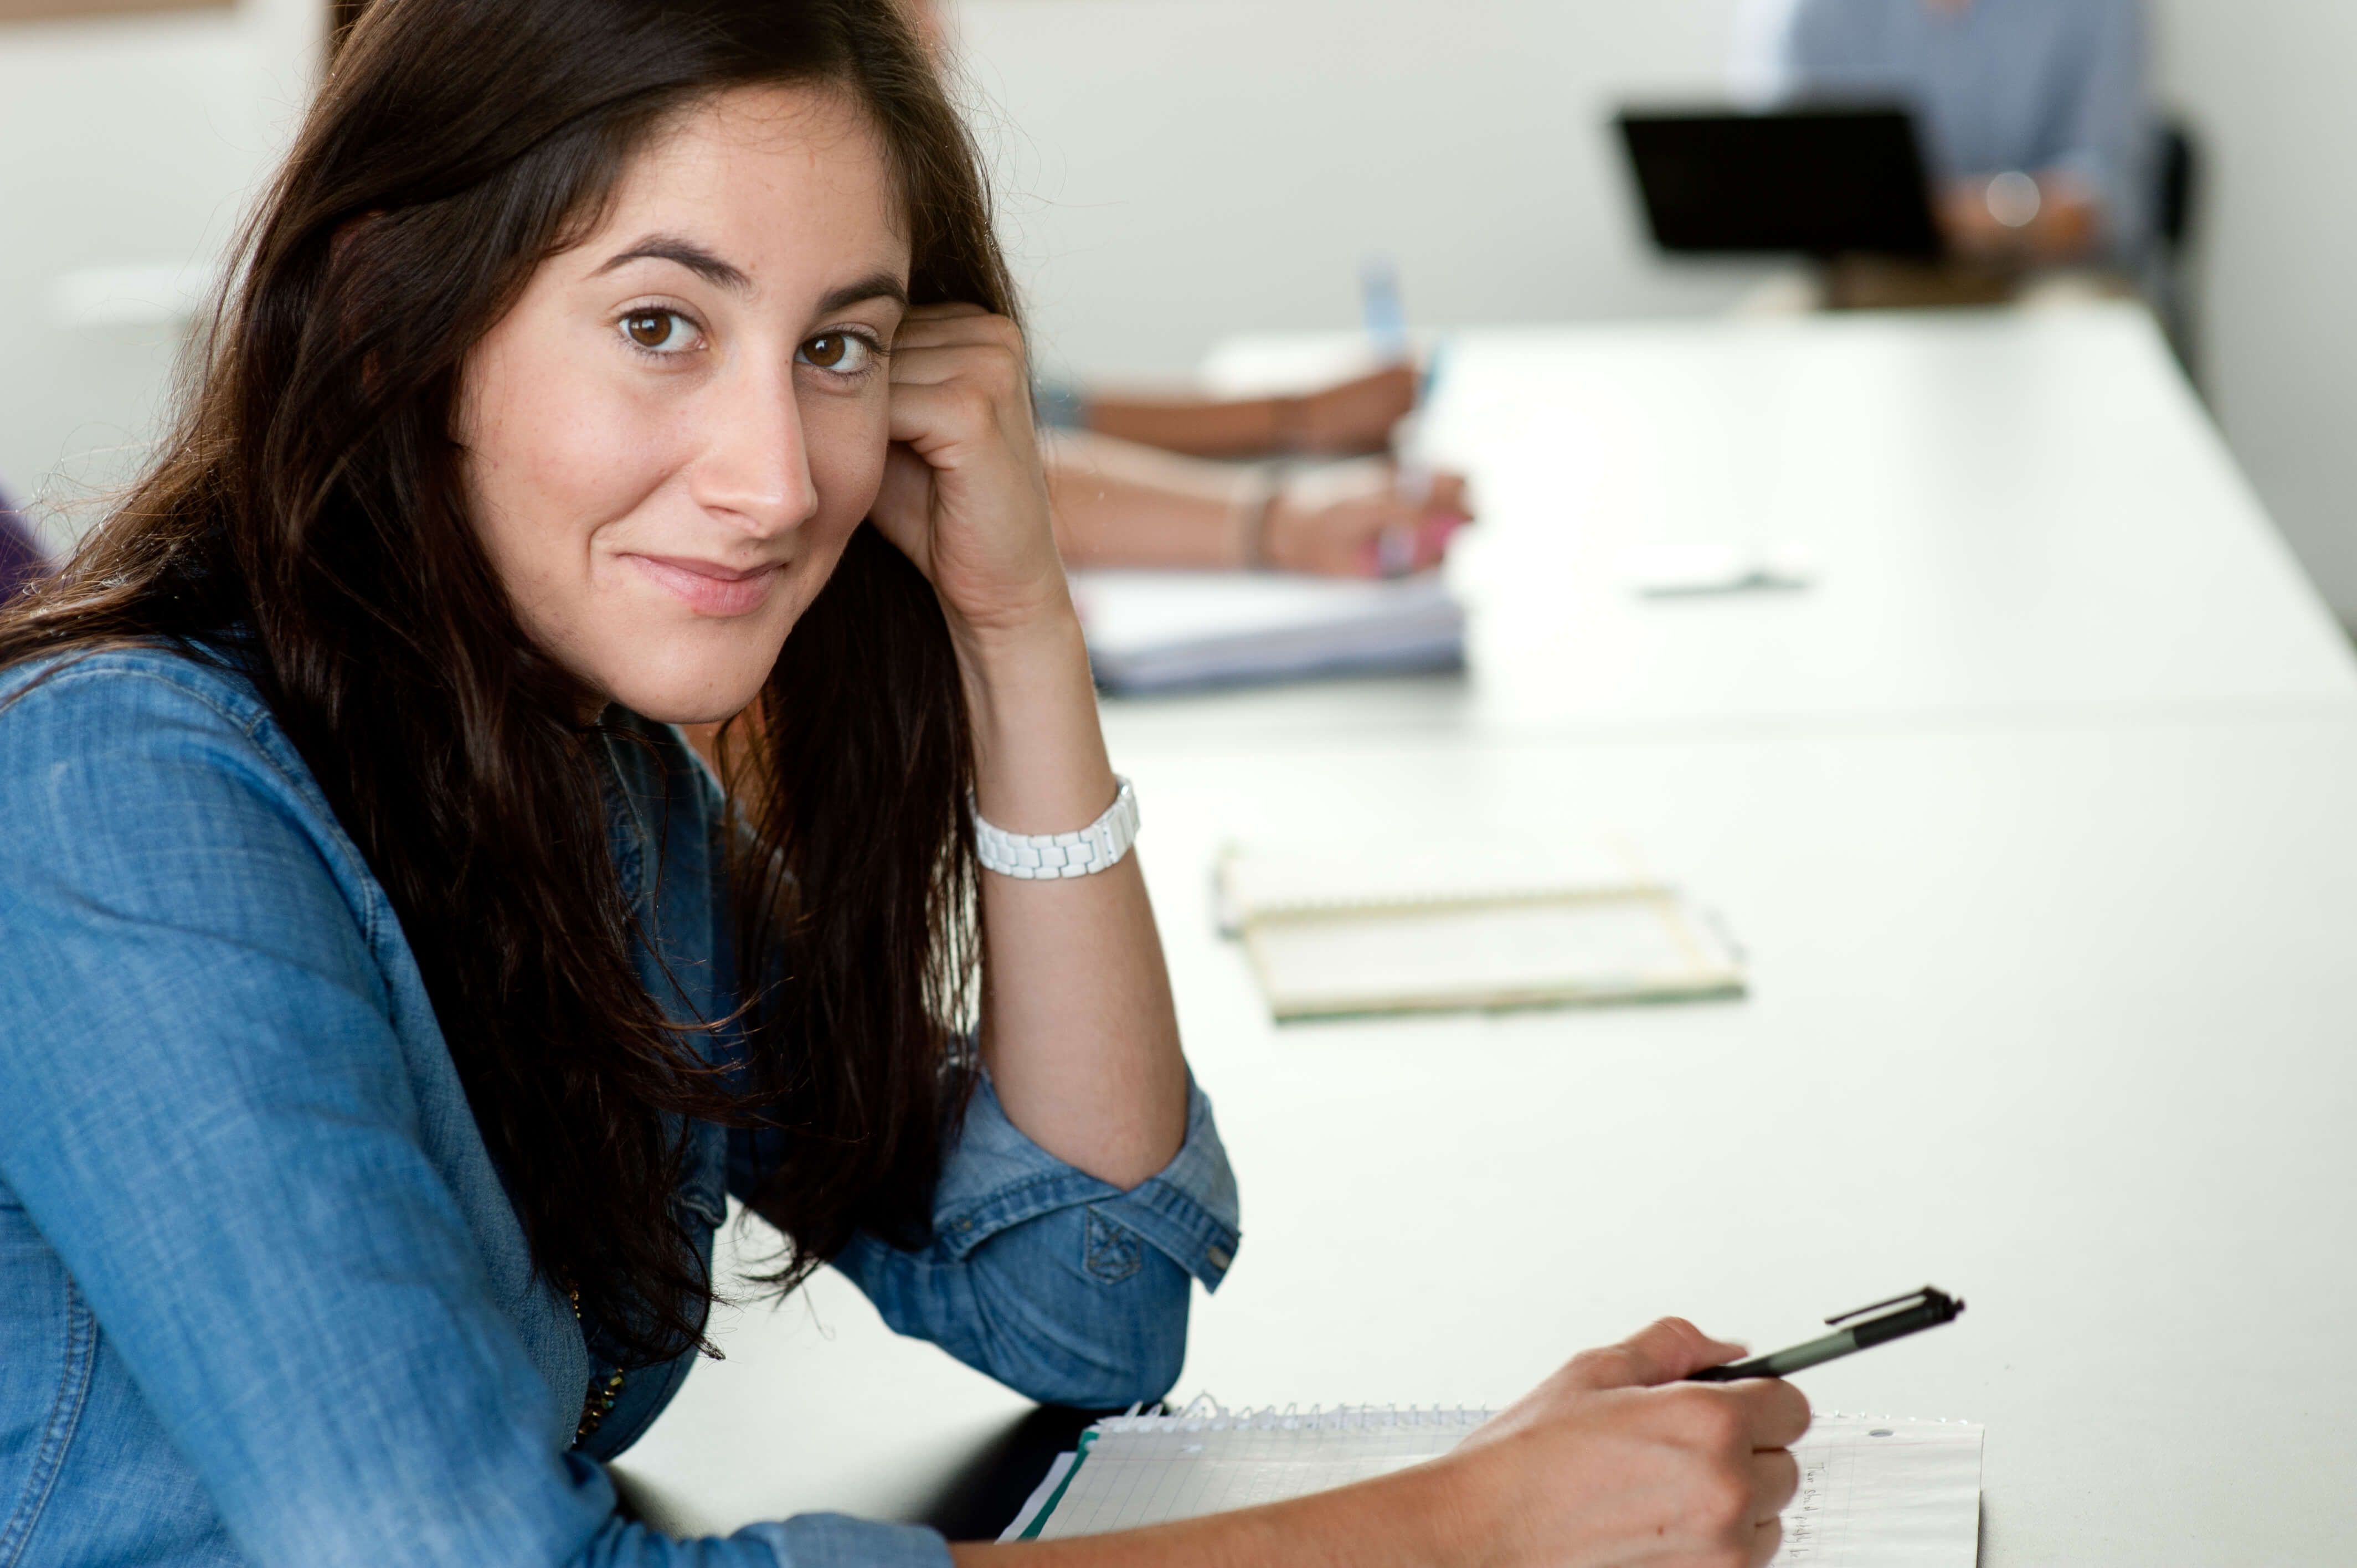 close-up photo of woman with long dark hair sitting at classroom table smiling